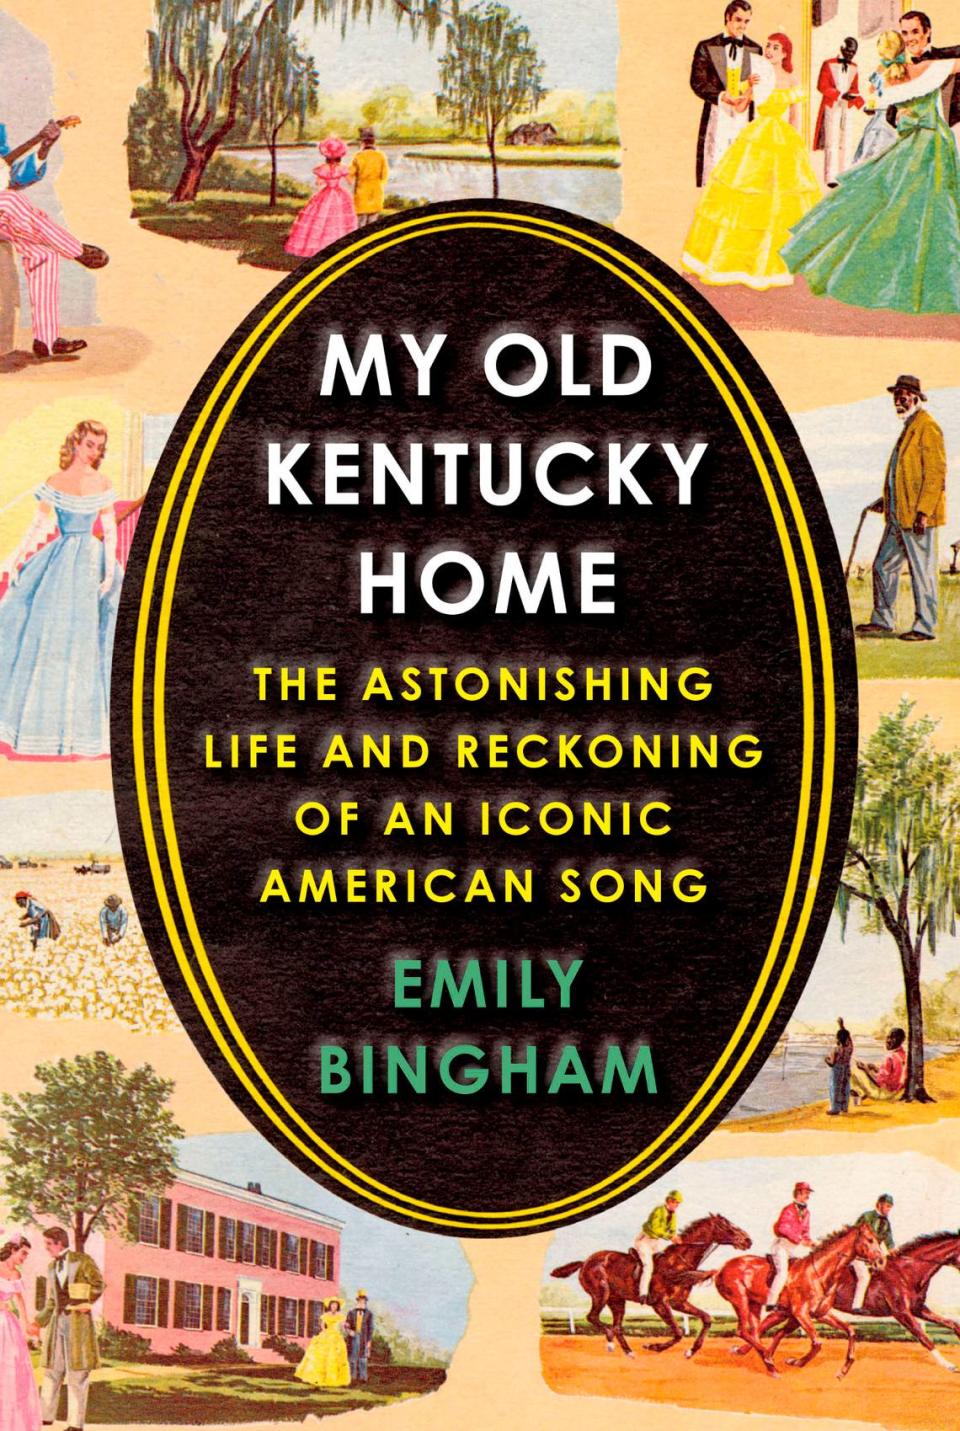 Front cover of the book “My Old Kentucky Home: The Astonishing Life and Reckoning of an Iconic American Song” written by author Emily Bingham. The book was published by the Knopf Doubleday Publishing Group.